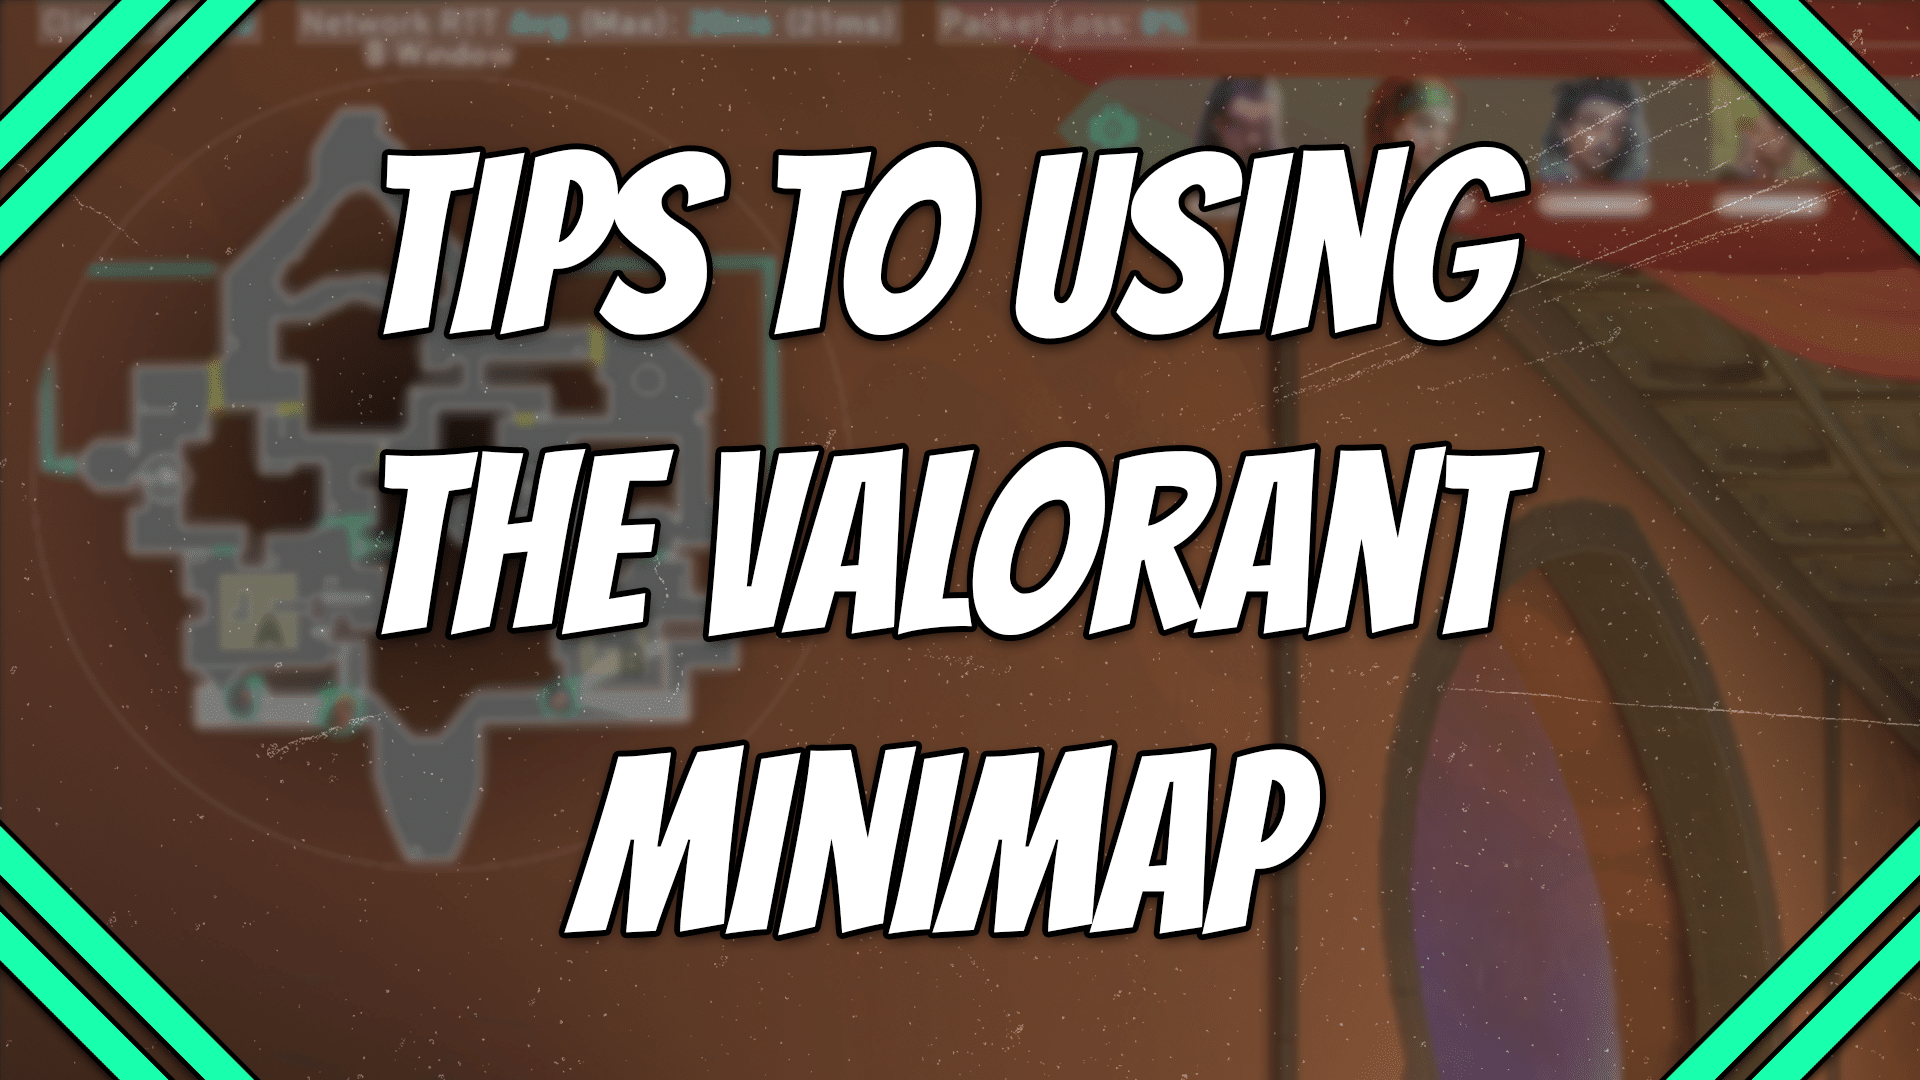 Tips to Using the Valorant Minimap title card